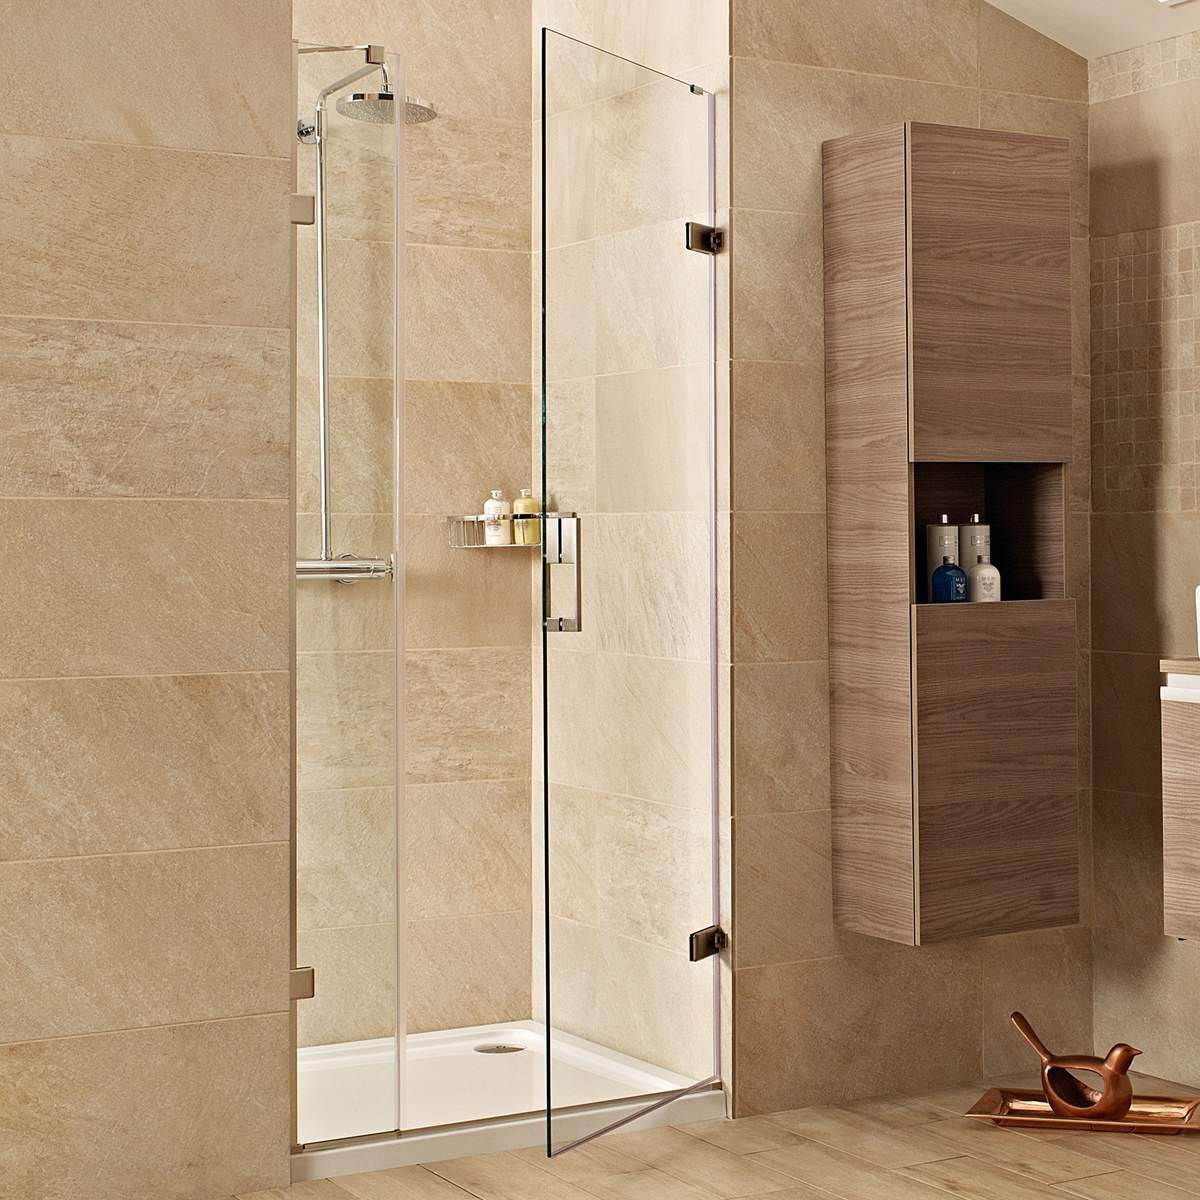 Roman Liberty 10 Hinged Door for 900mm+ Alcove Fitting - Brushed Nickel [TL1HD13N] [DOOR ONLY IN-LINE PANEL NOT INCLUDED]